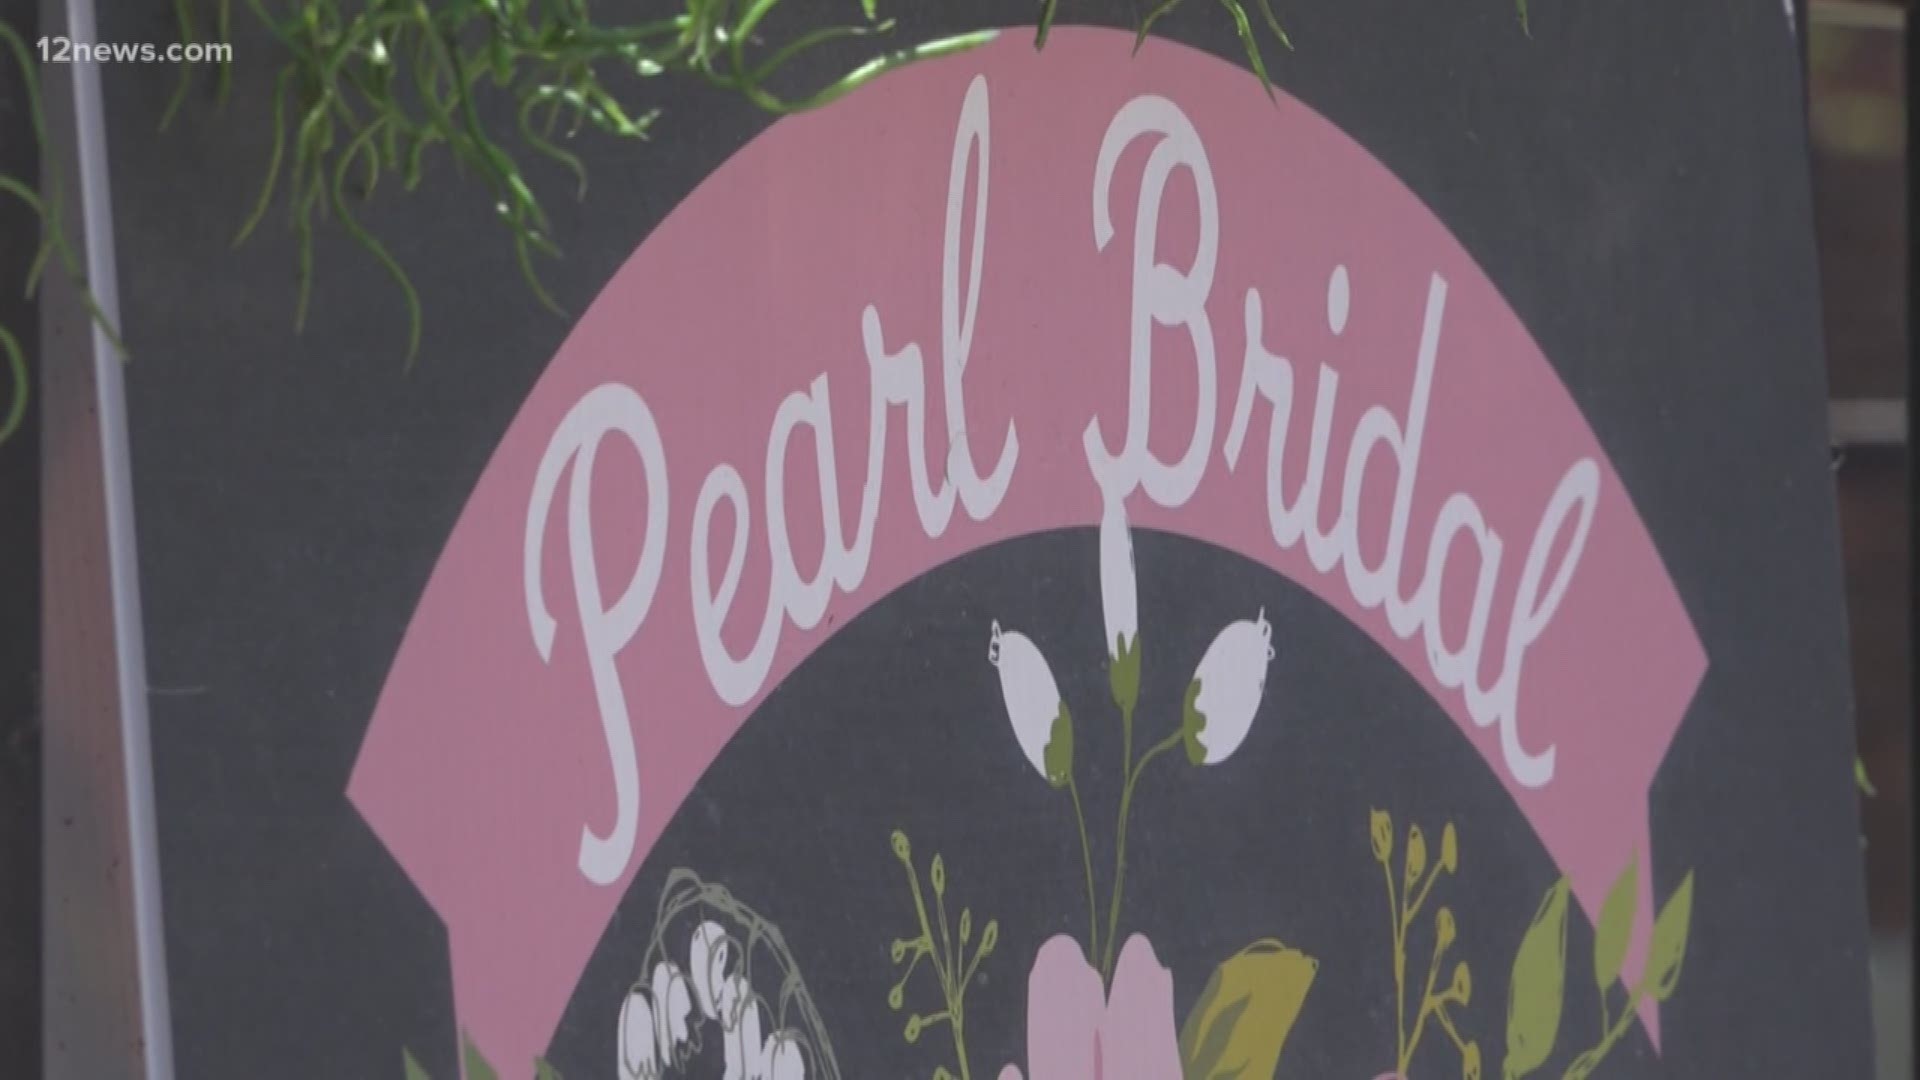 Pearl Bridal Shop promised brides custom wedding dresses for their big day. After collecting thousands in pre-payments from unsuspecting brides the store closed. Now, the AZ attorney general is suing the shop's owners.